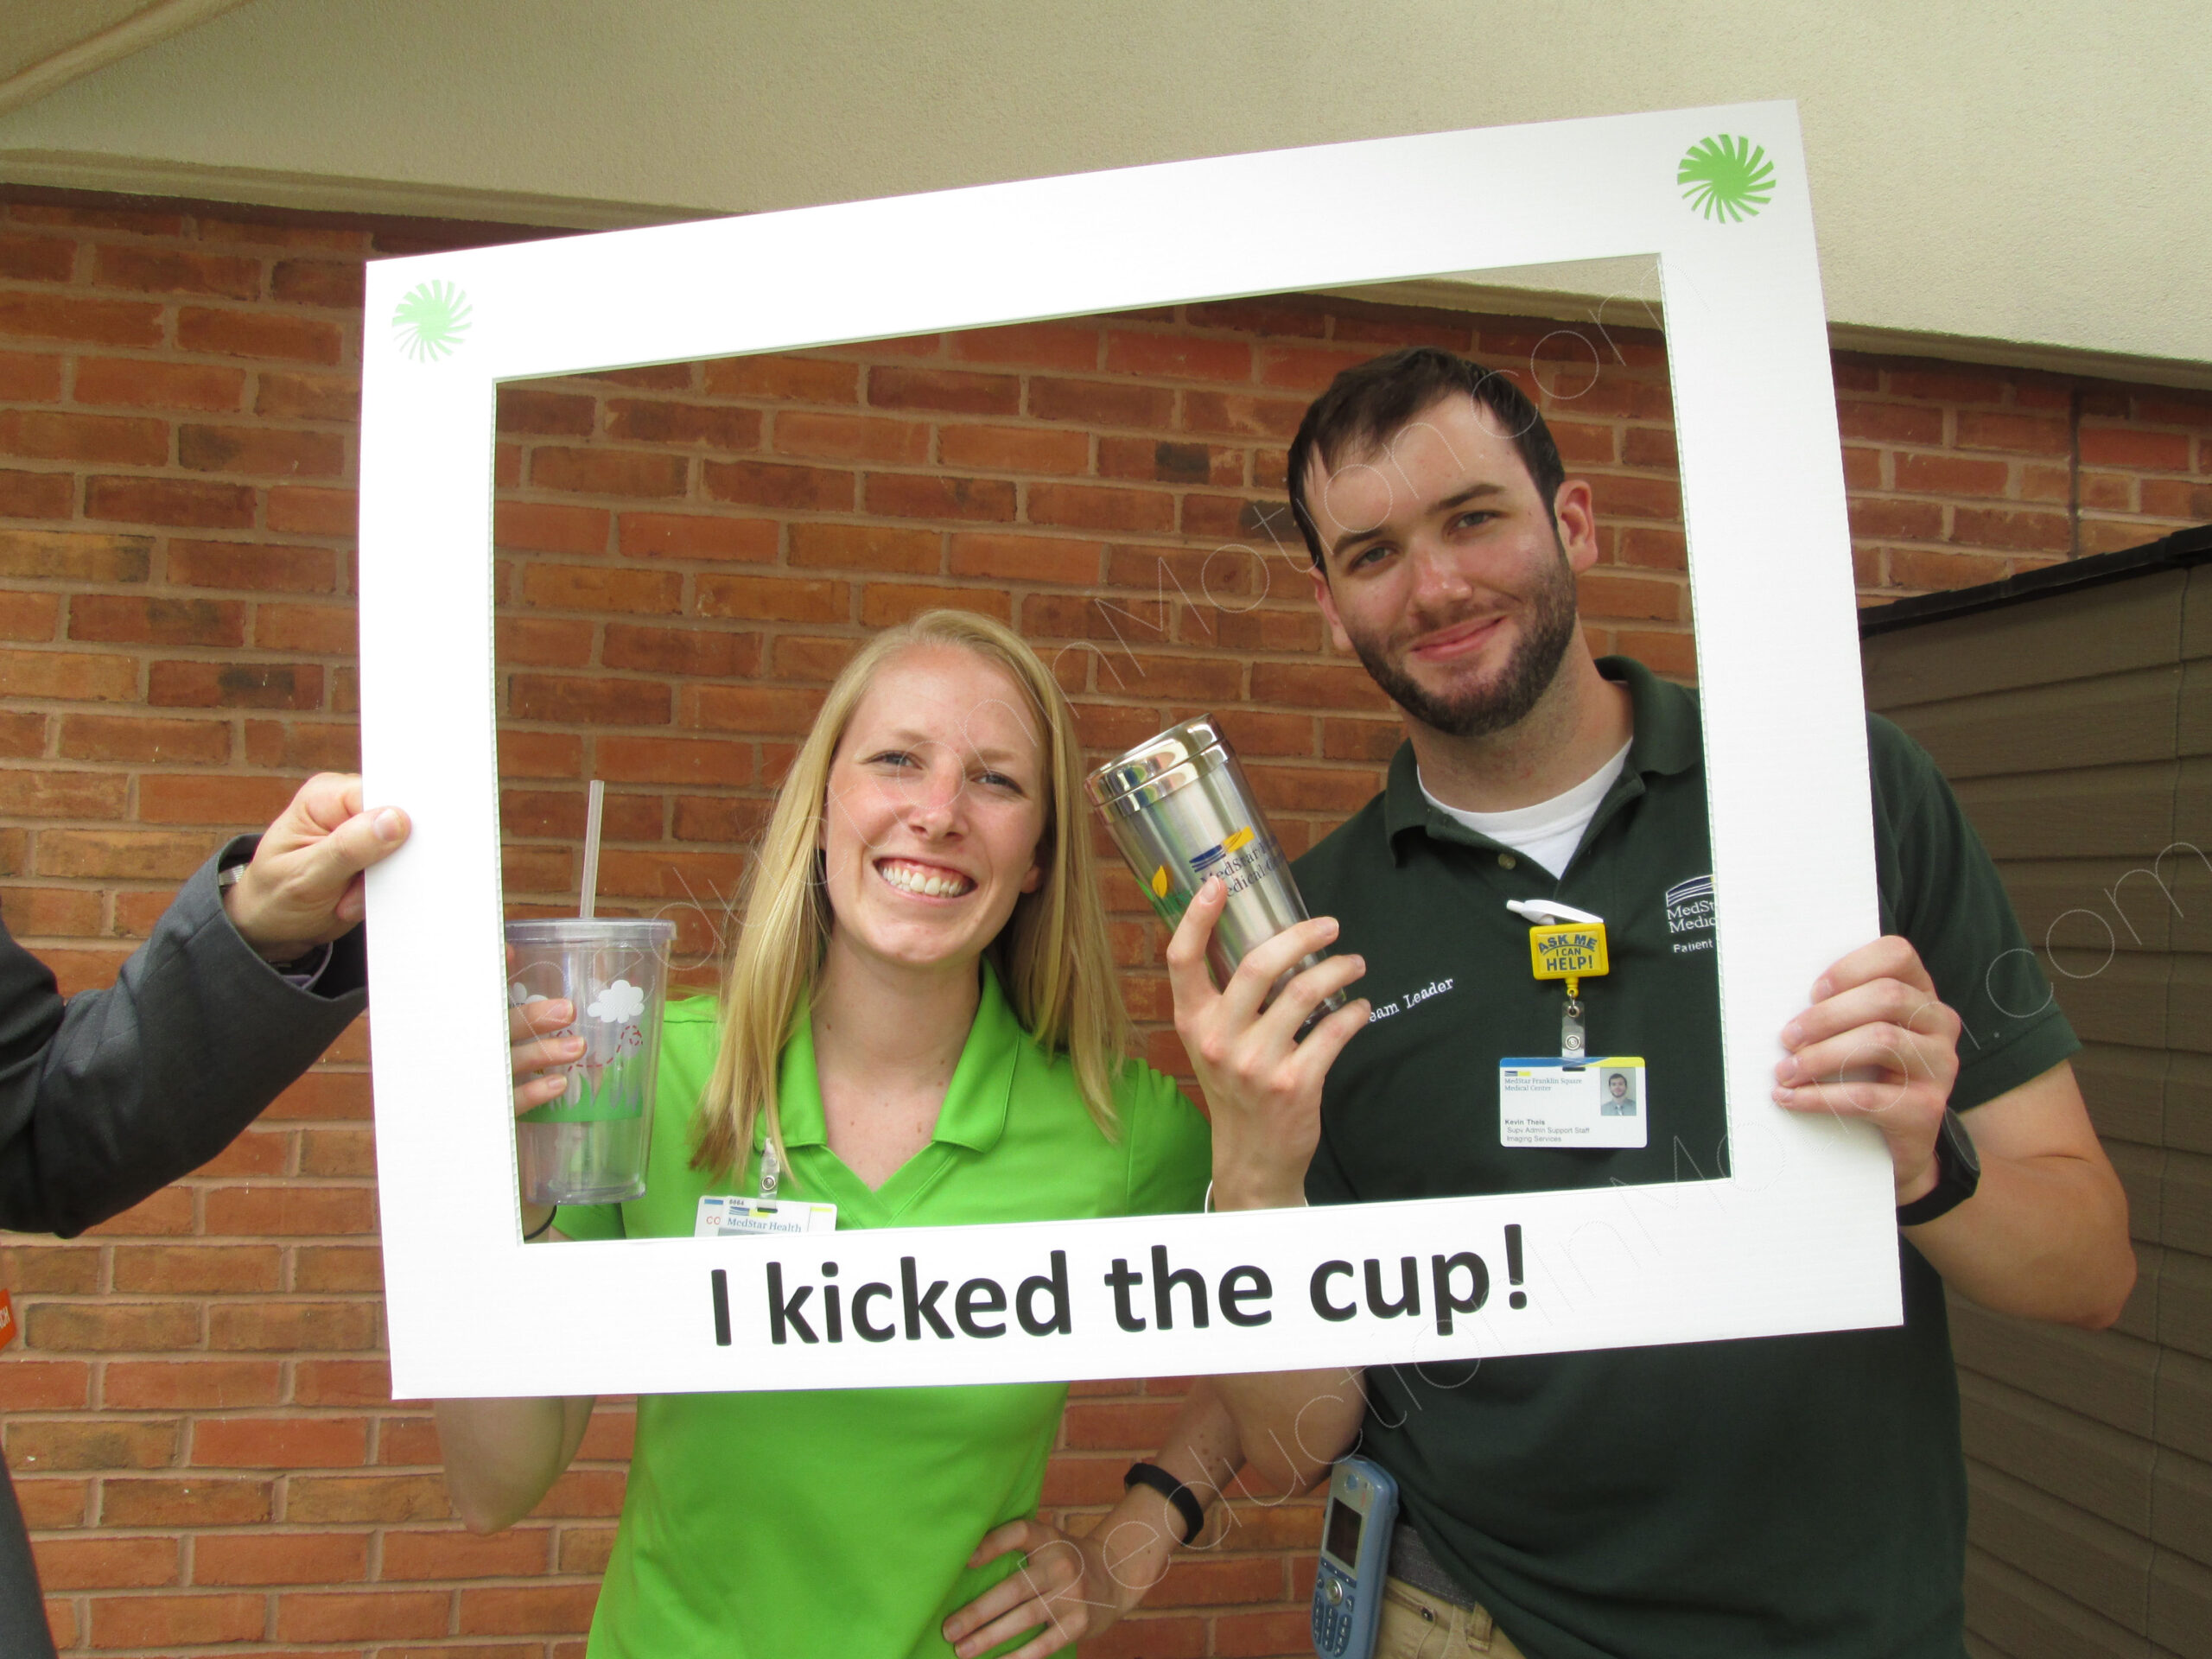 waste consulting services project kick the cup sustainability reusable mugs